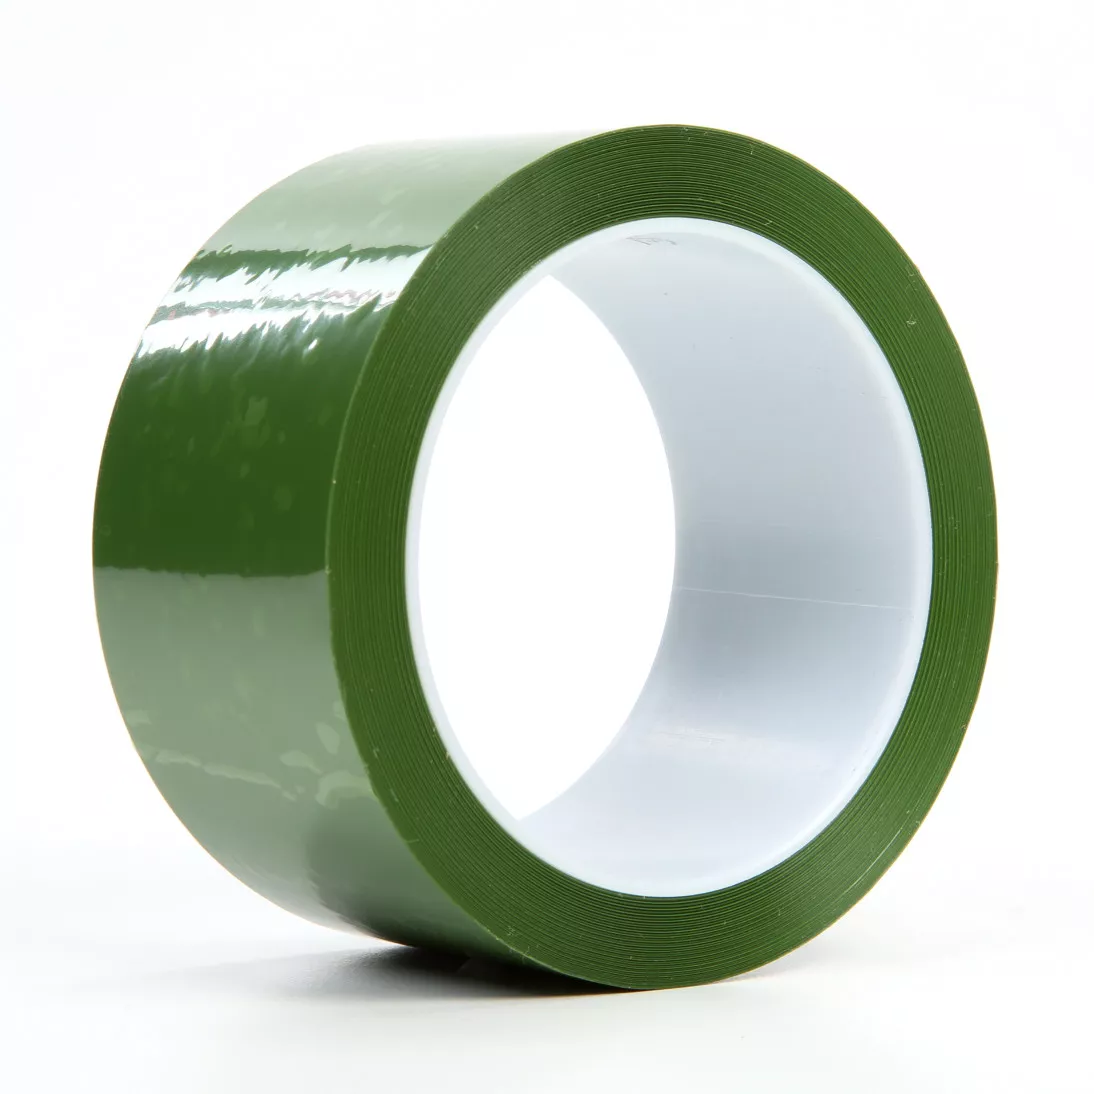 3M™ Polyester Tape 8402, Green, 1.9 mil, 48 in x 72 yd, 1 roll per case